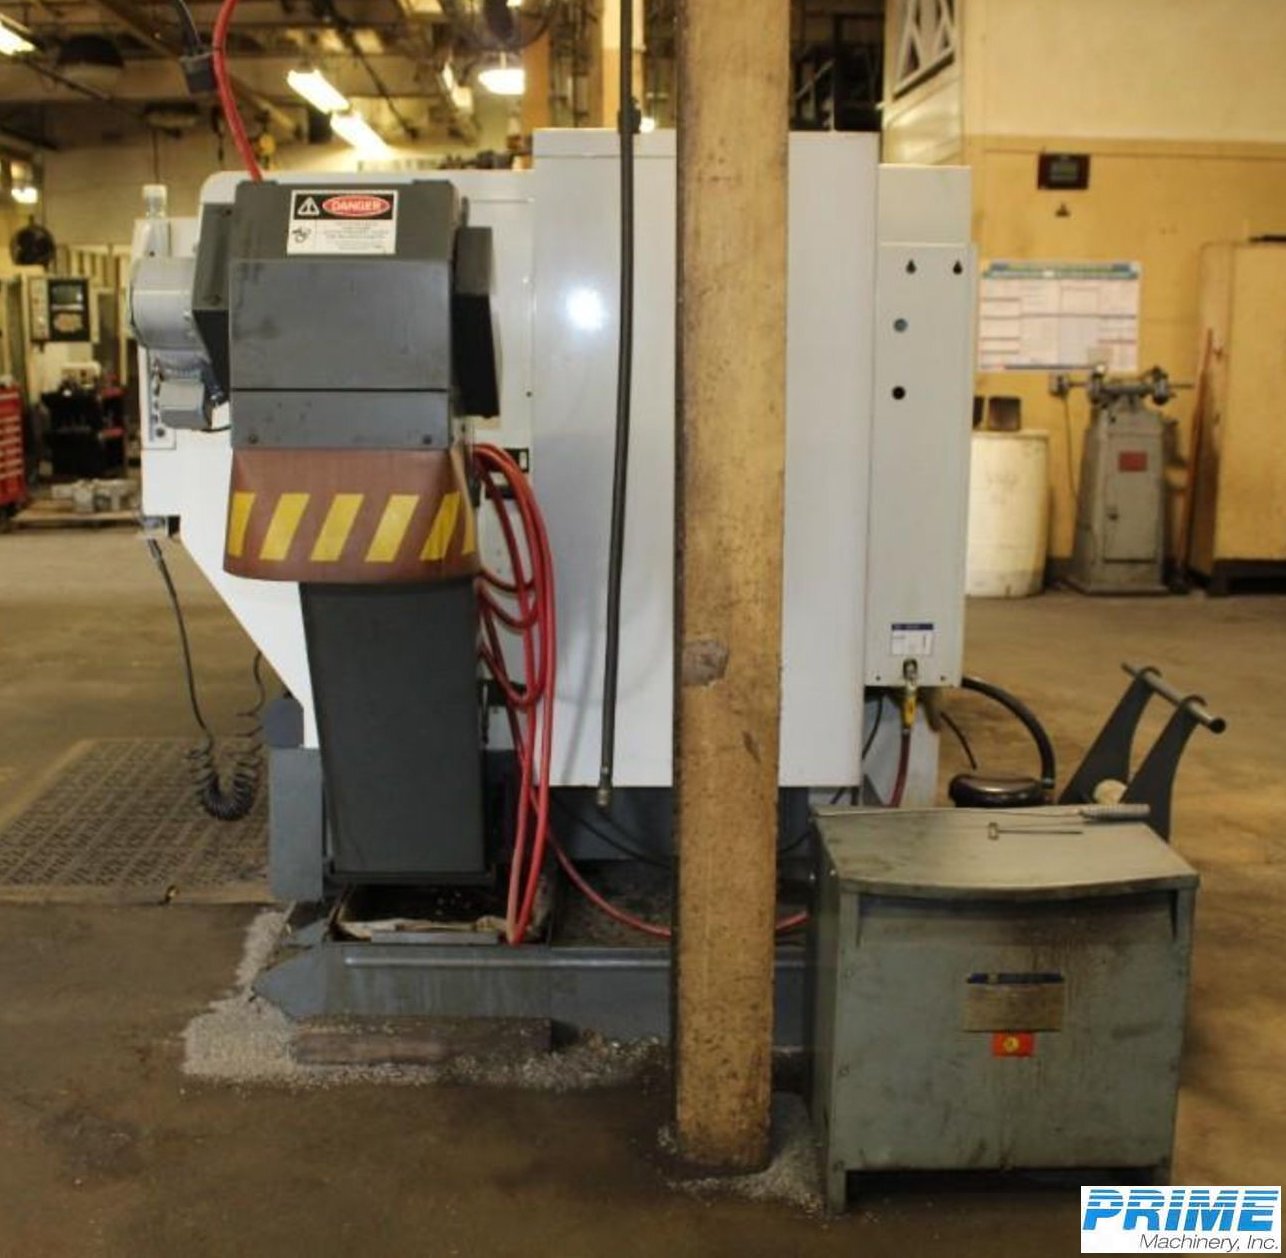 2012 HAAS ST-20 LATHES, COMBINATION, N/C & CNC | Prime Machinery